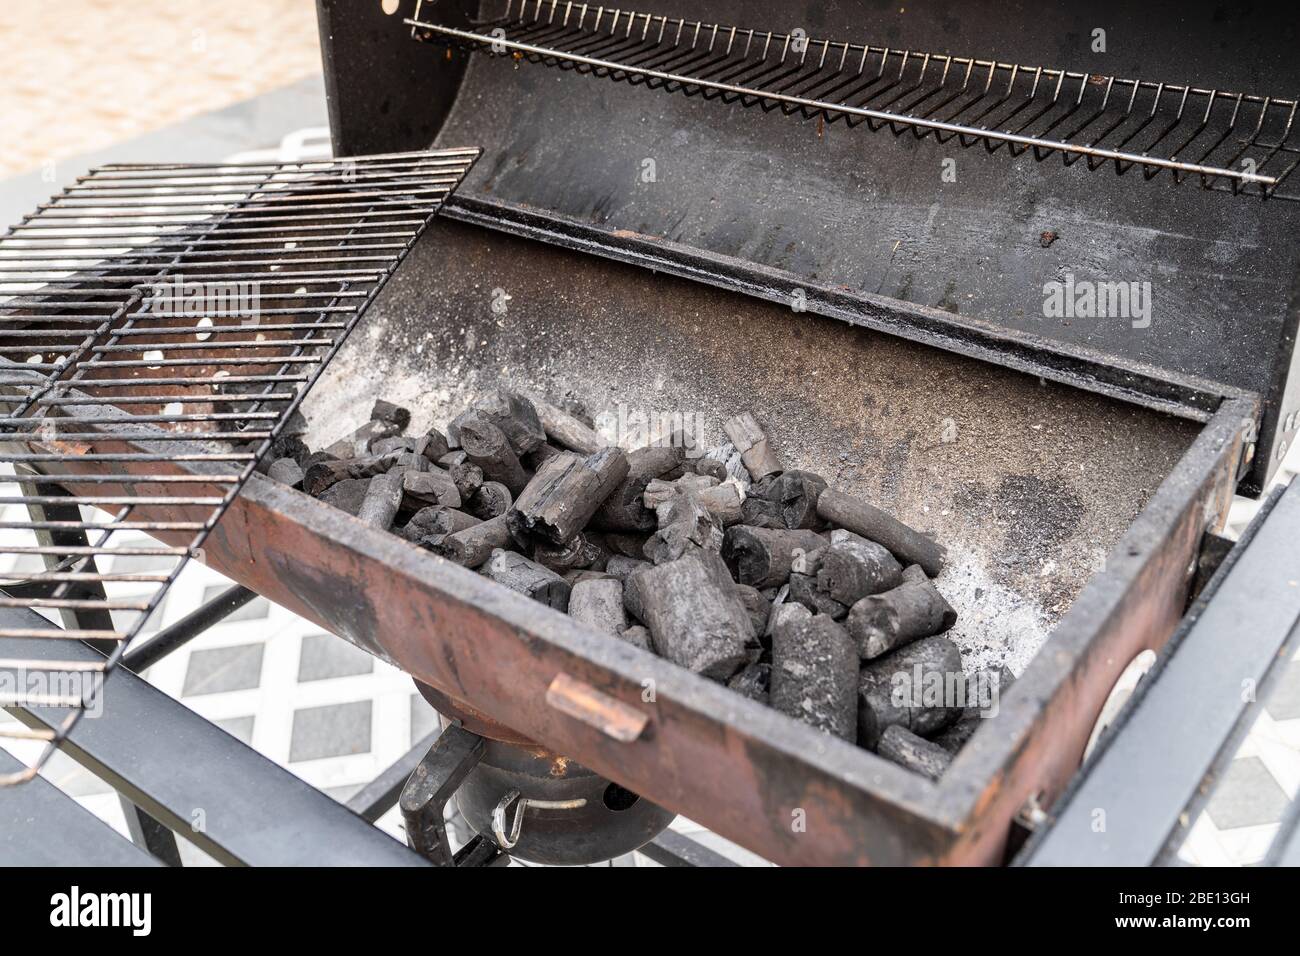 Bediende piek Overredend Grand outdoor BBQ grill metal stainless stove on backyard Stock Photo -  Alamy